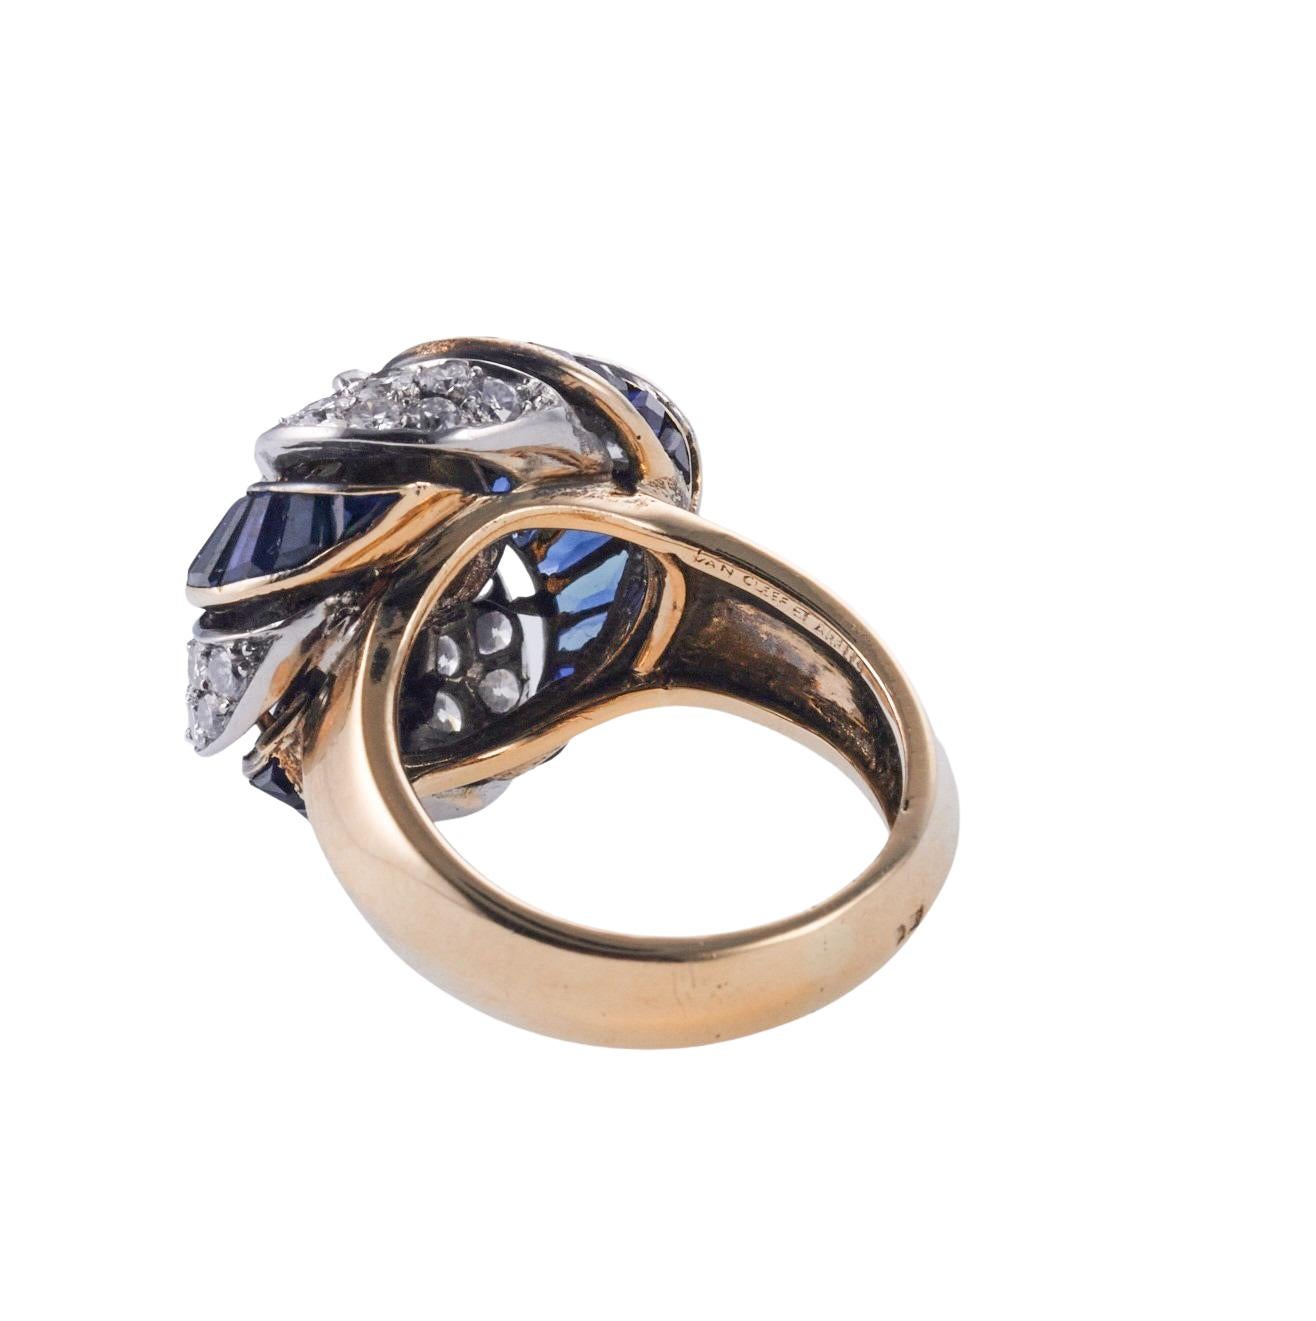 Van Cleef & Arpels Sapphire Diamond Gold Cocktail Ring In Excellent Condition For Sale In New York, NY